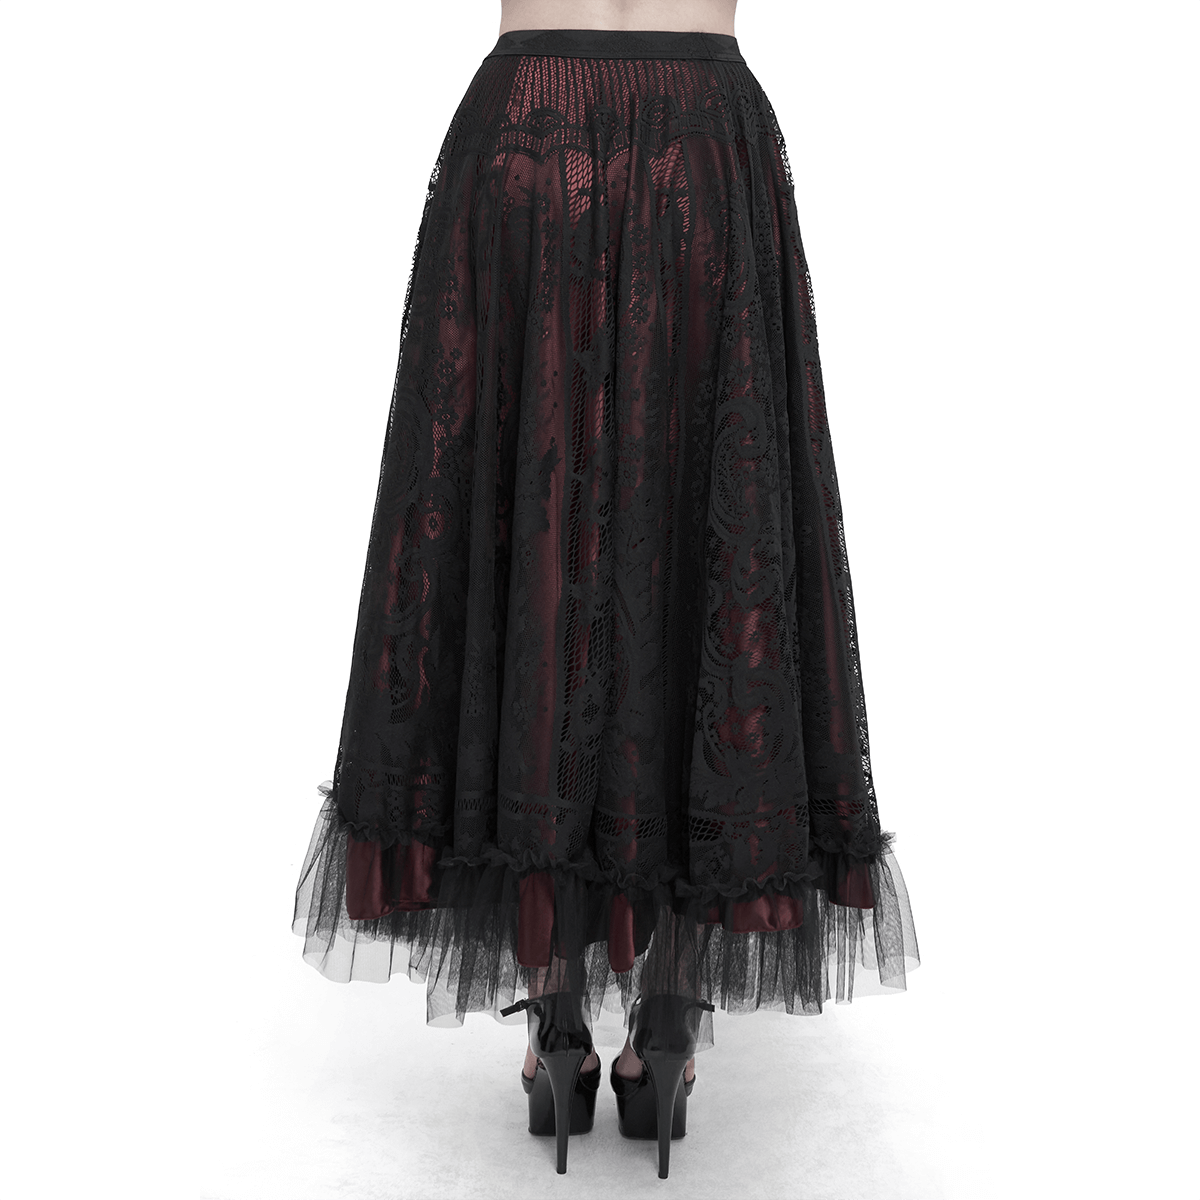 Women's Gothic Lace Layered Draped Long Skirt / Vintage Wine Red Skirt With Elastic Waistband